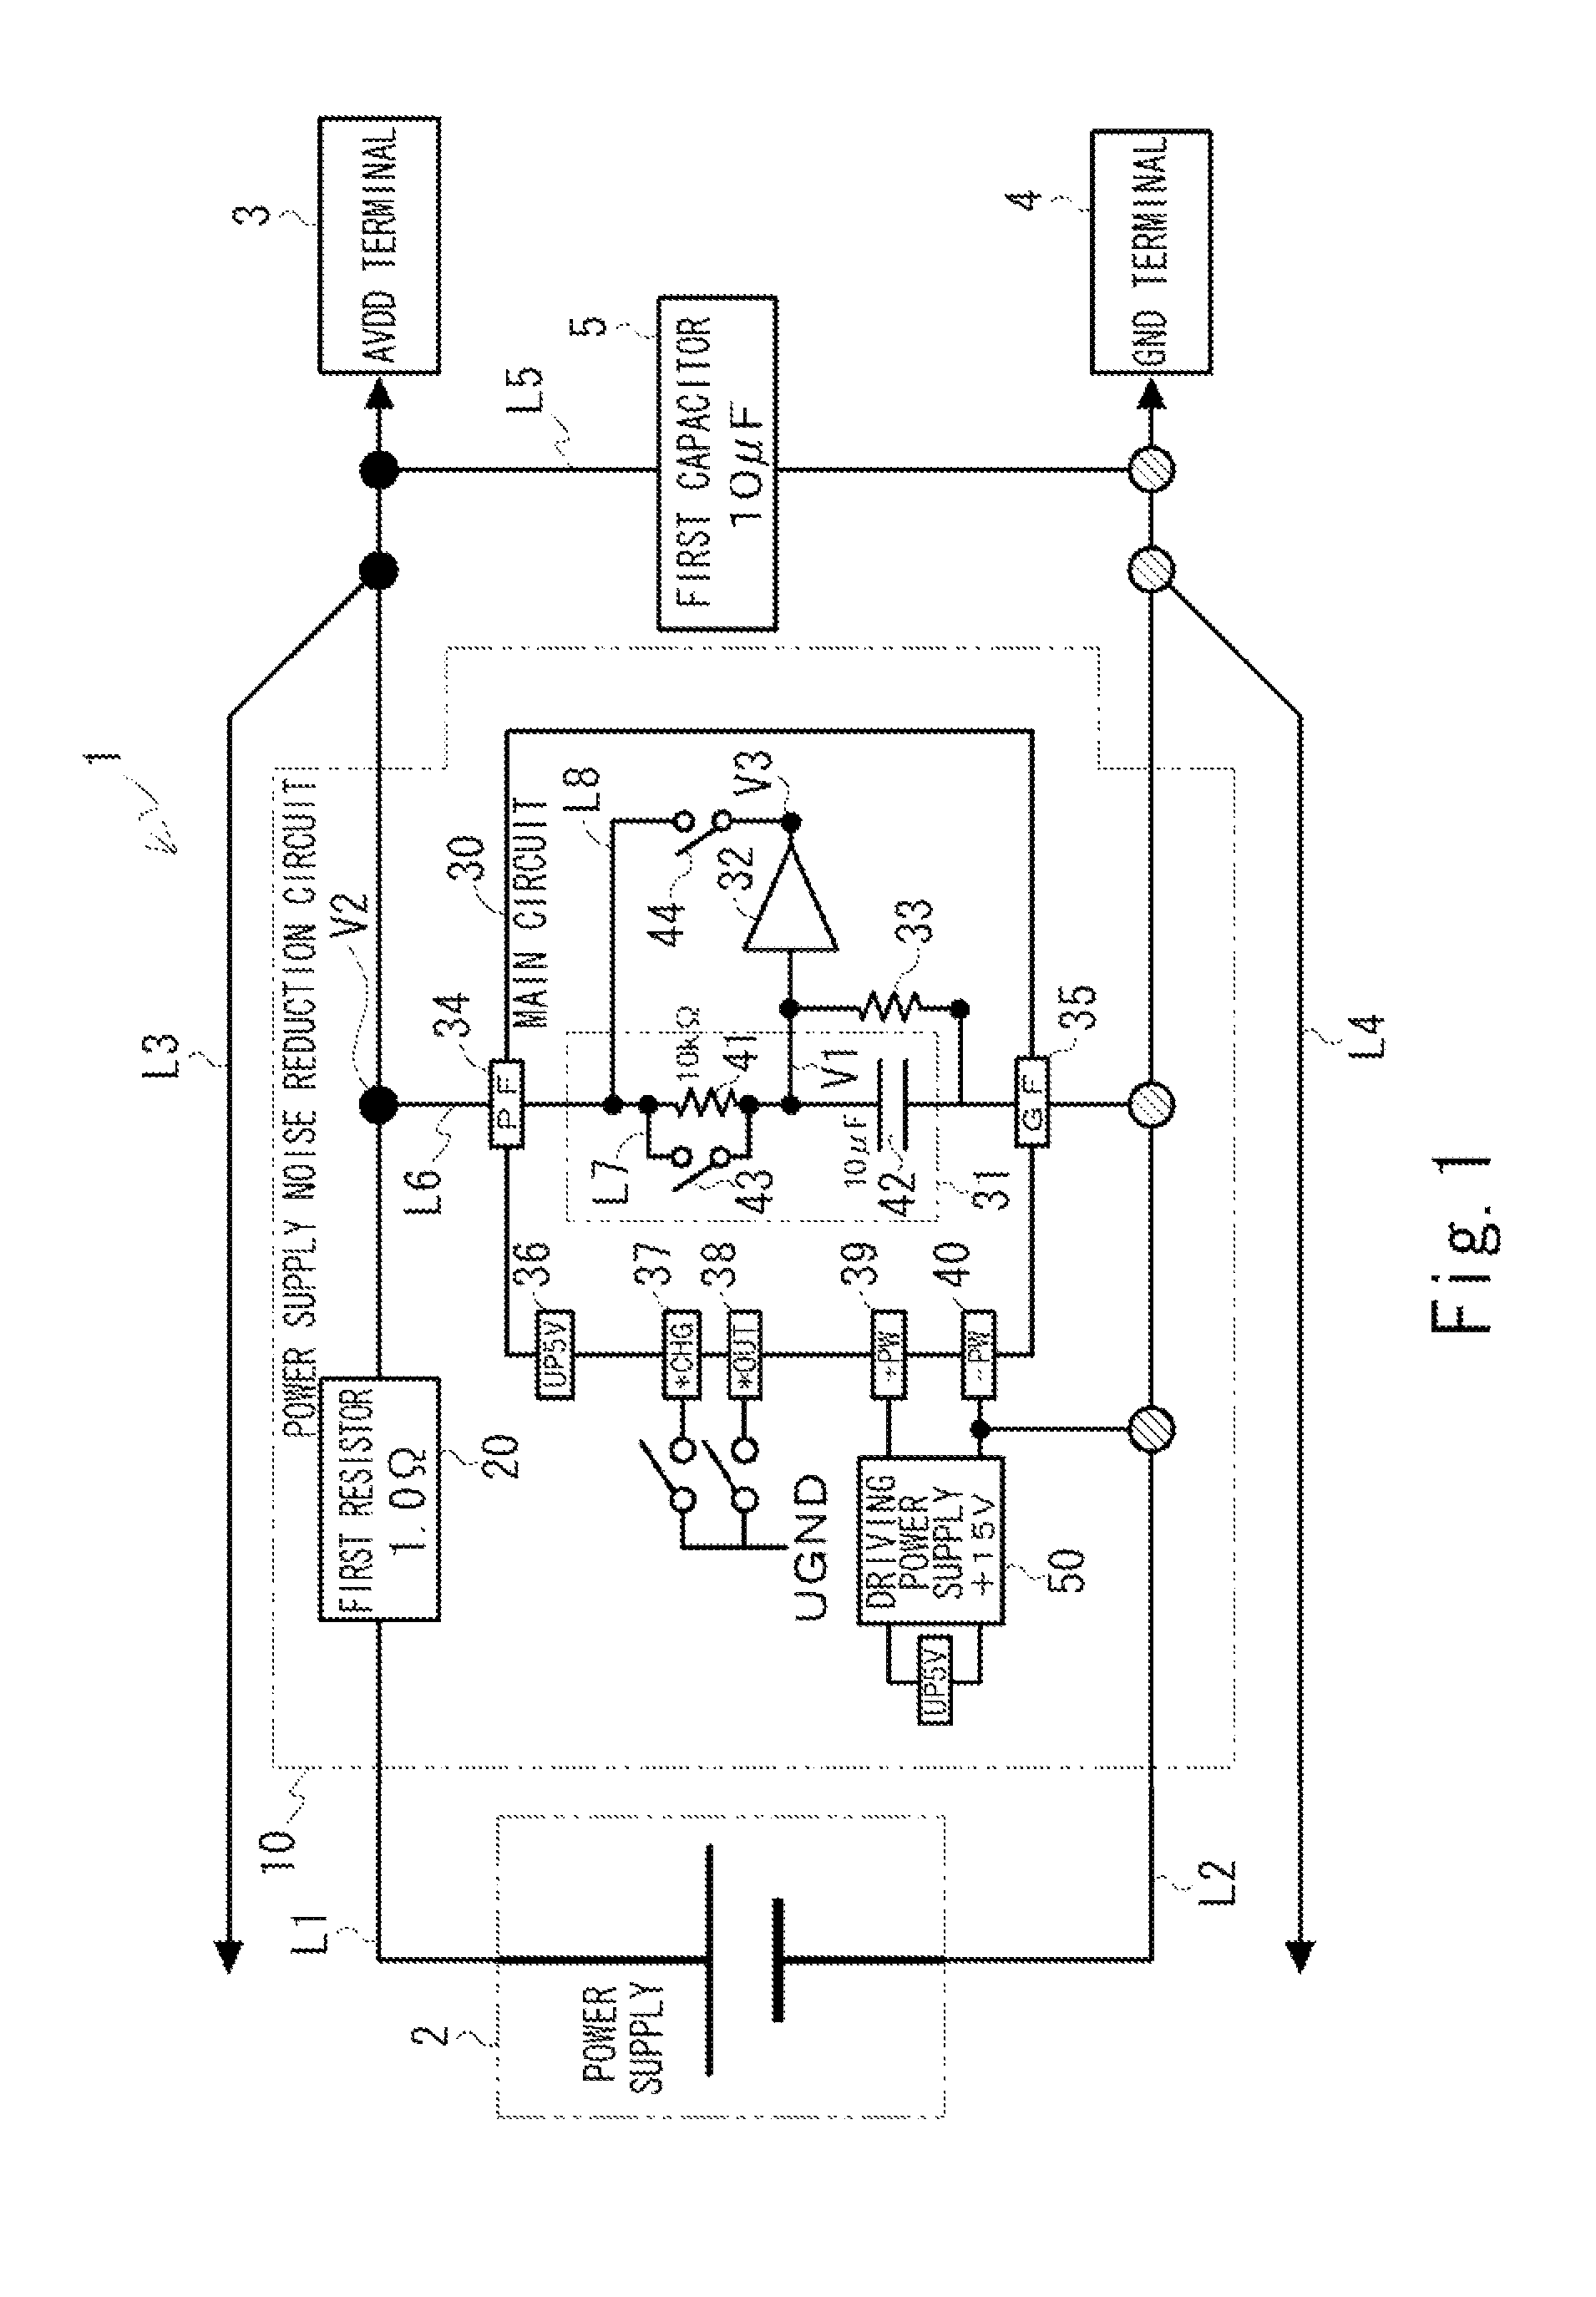 Power supply noise reduction circuit and power supply noise reduction method